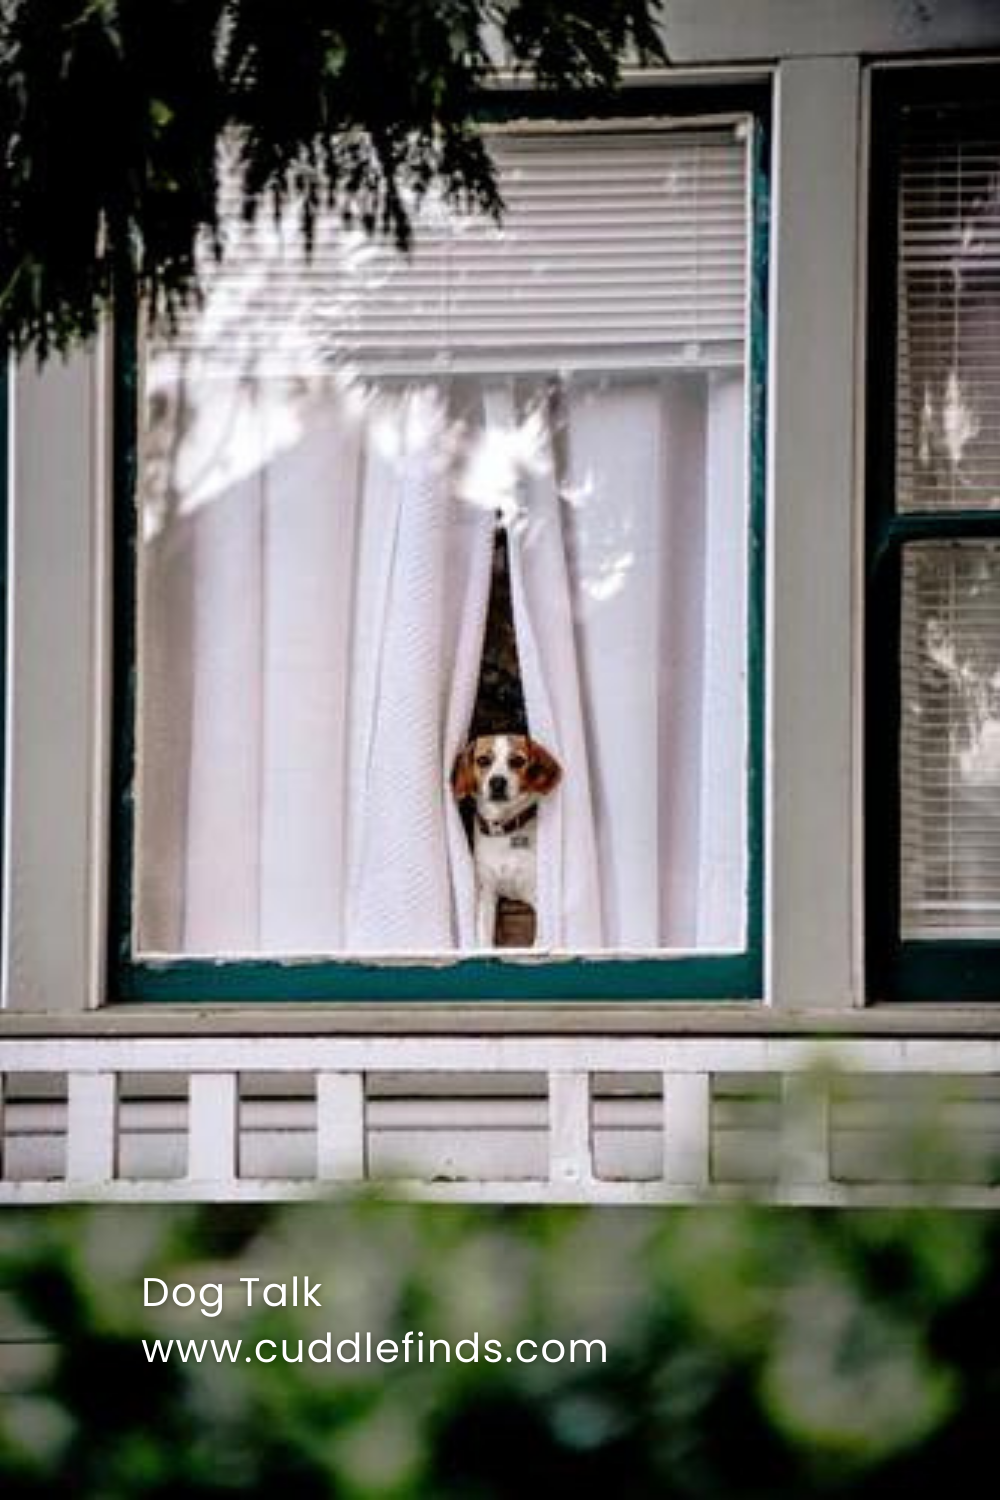 A stay at home dog looks out the window during lock down.